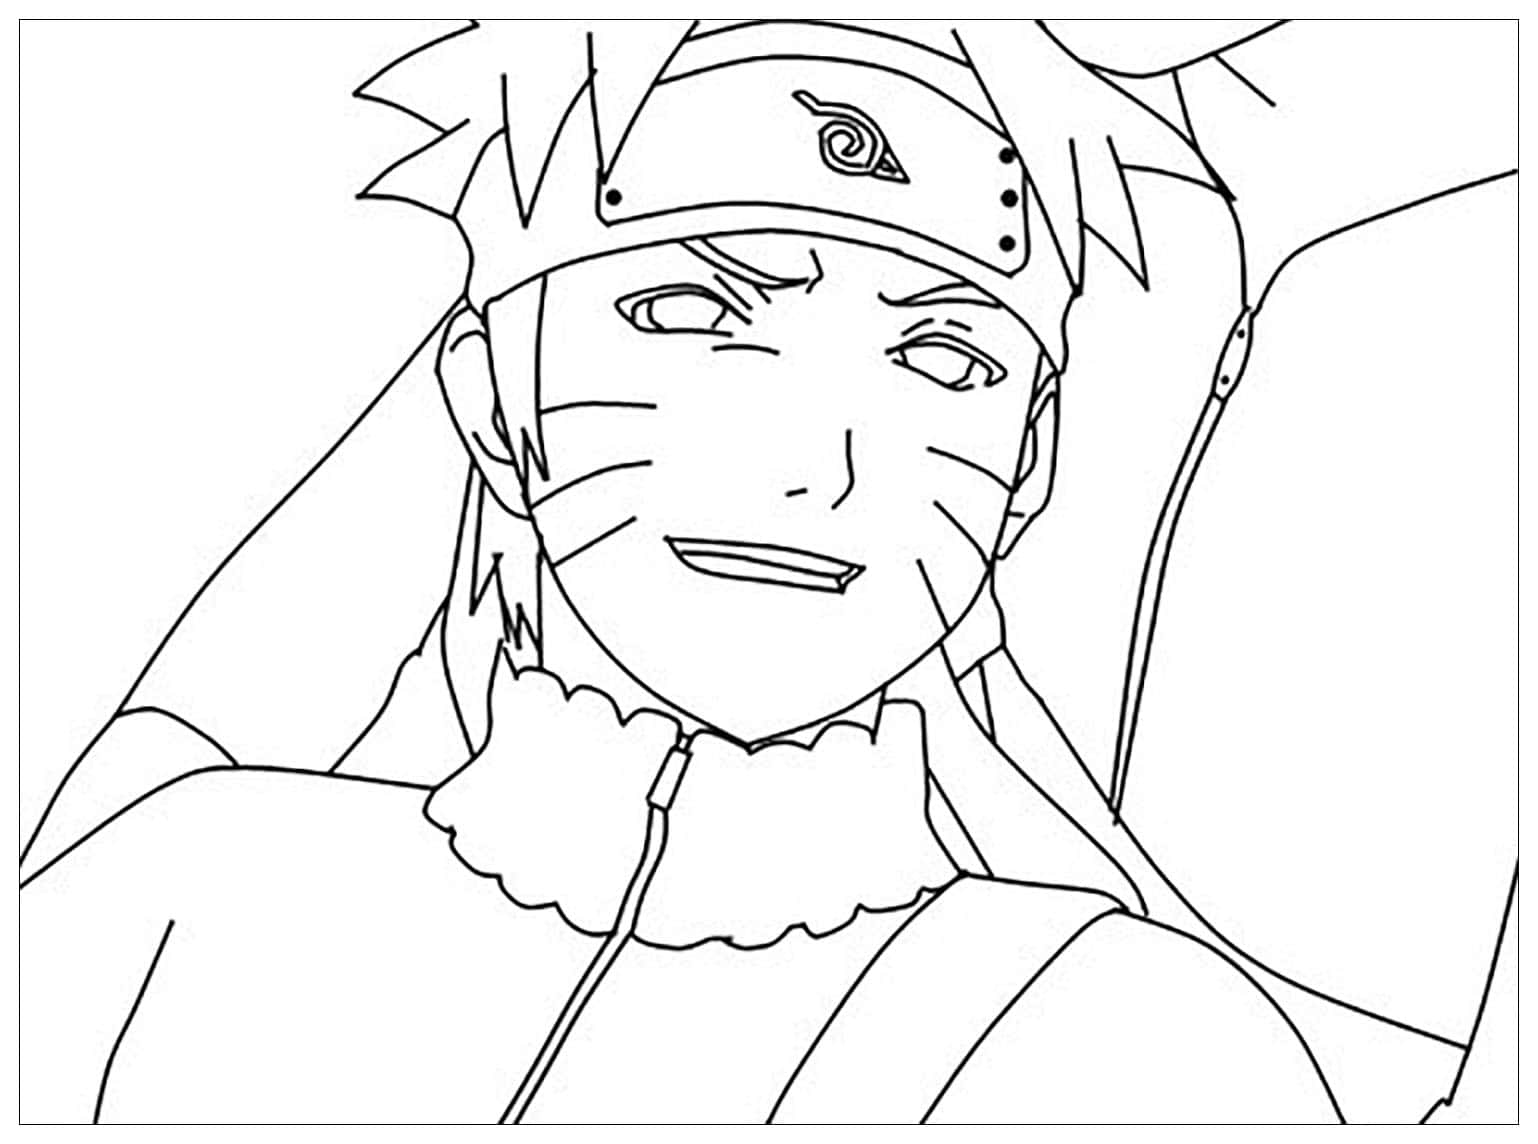 Have Fun With These Naruto Coloring Pages PDF Ideas  Coloringfoldercom   Manga coloring book Cartoon coloring pages Mermaid coloring pages